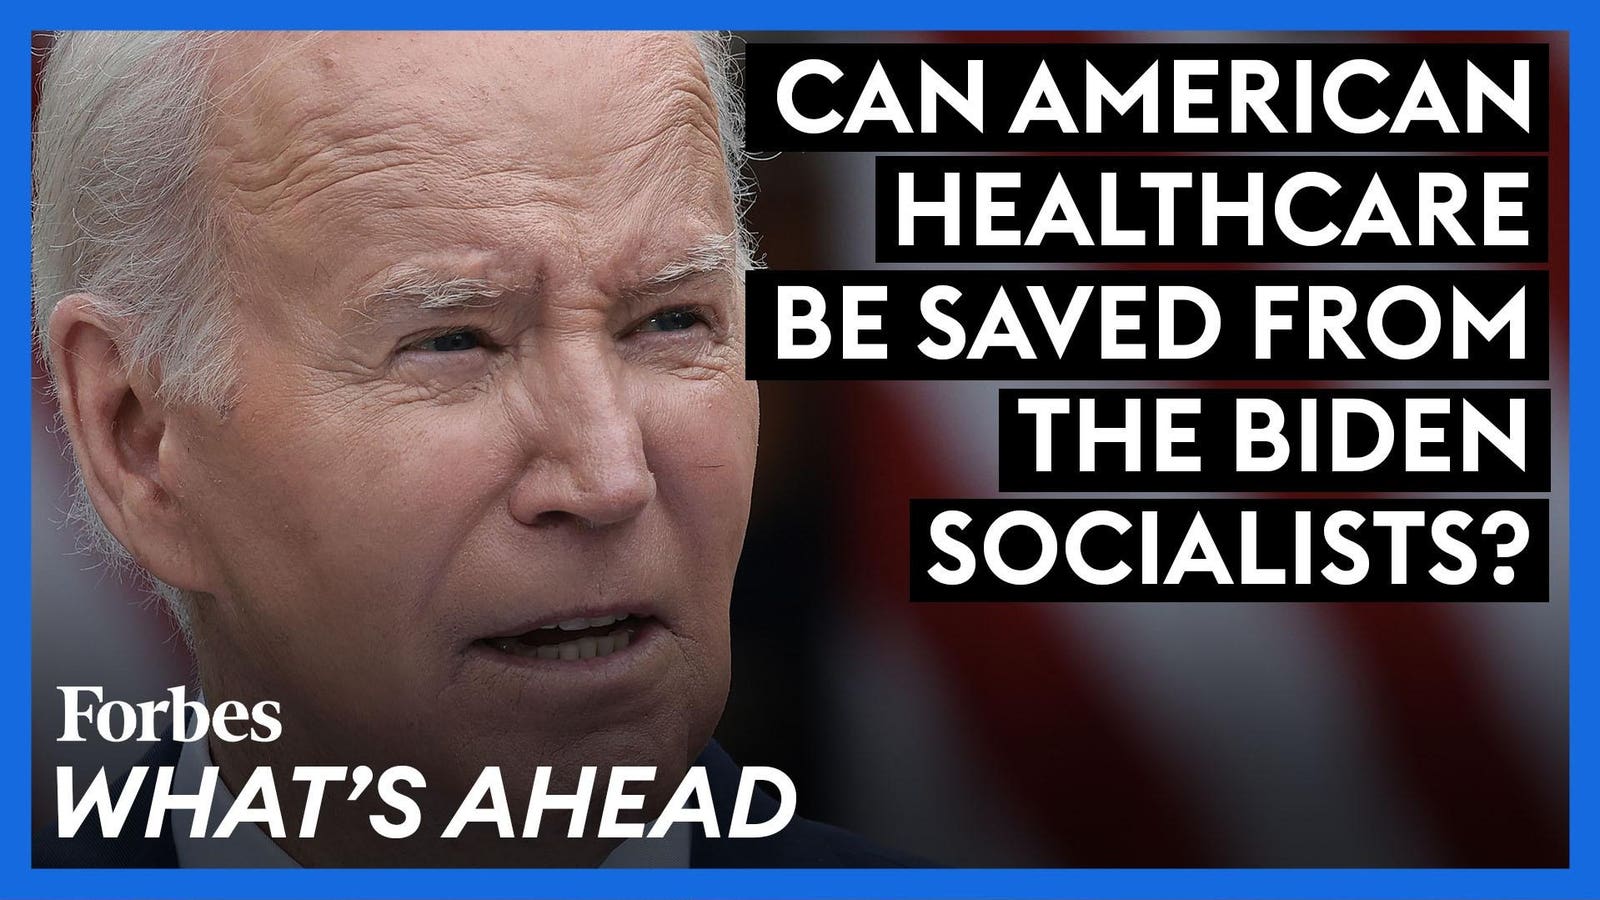 Can American Healthcare Be Saved From The Biden Socialists?